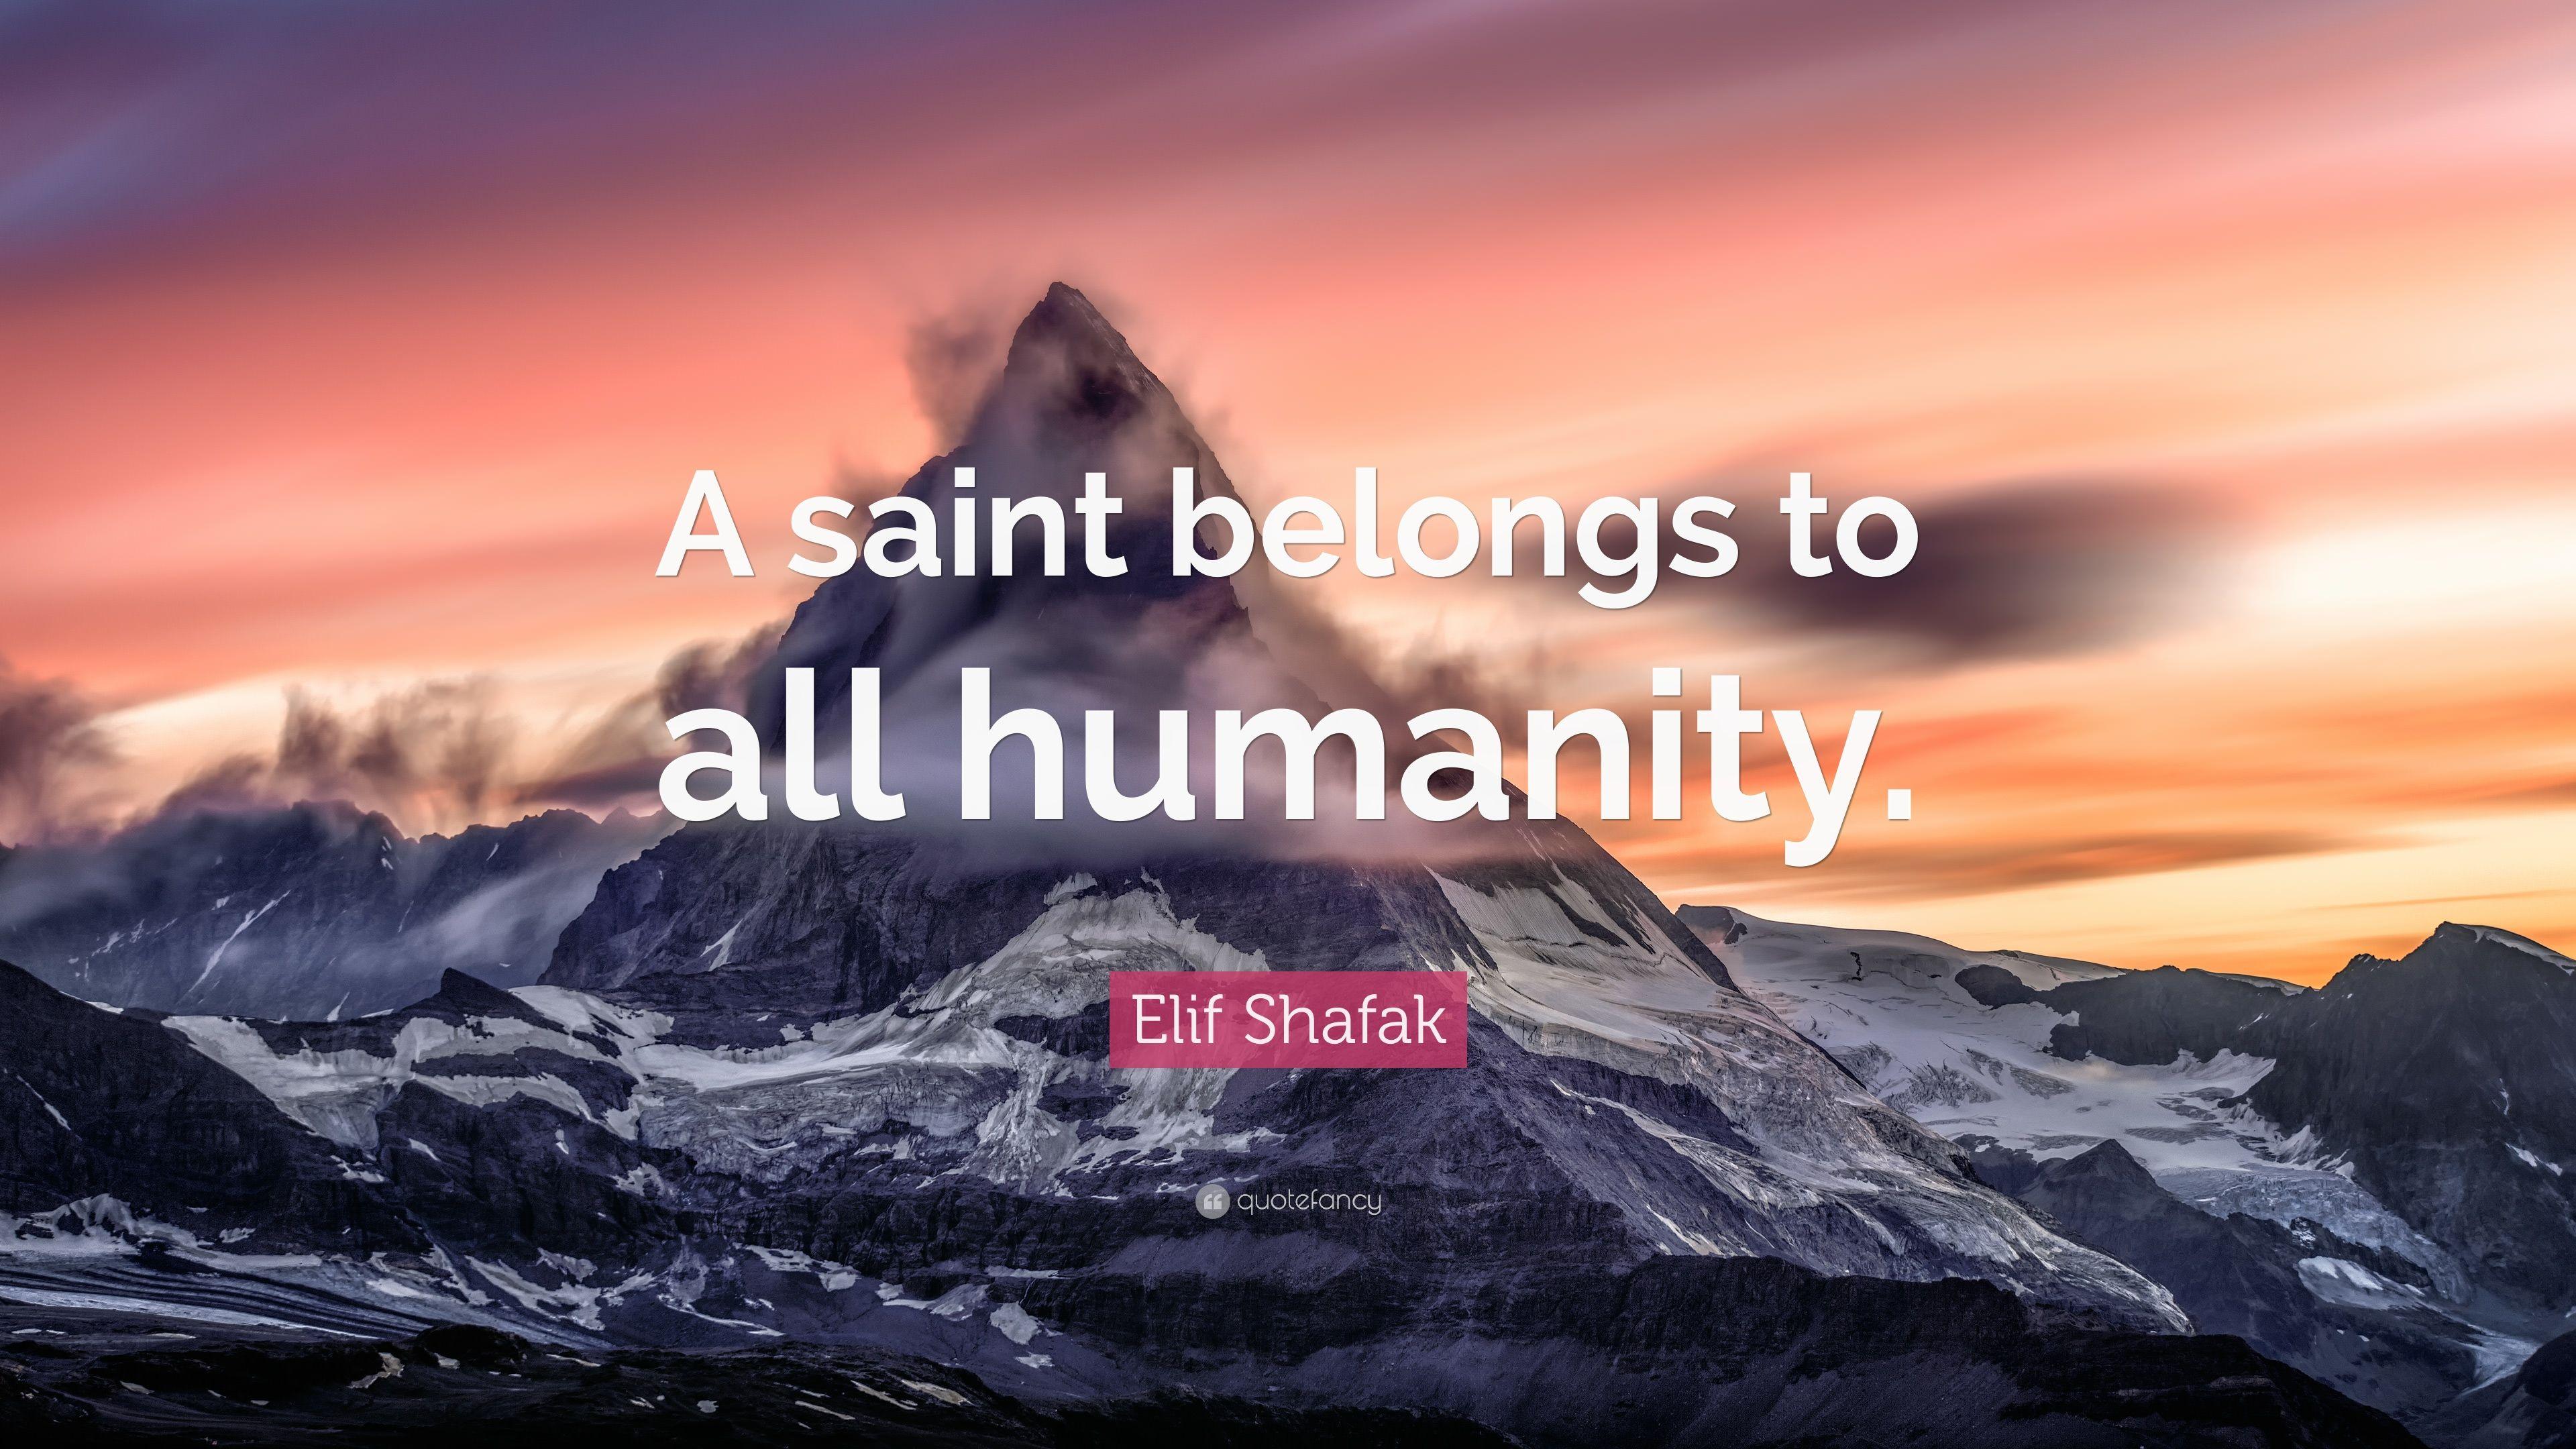 Elif Shafak Quote: “A saint belongs to all humanity.” 9